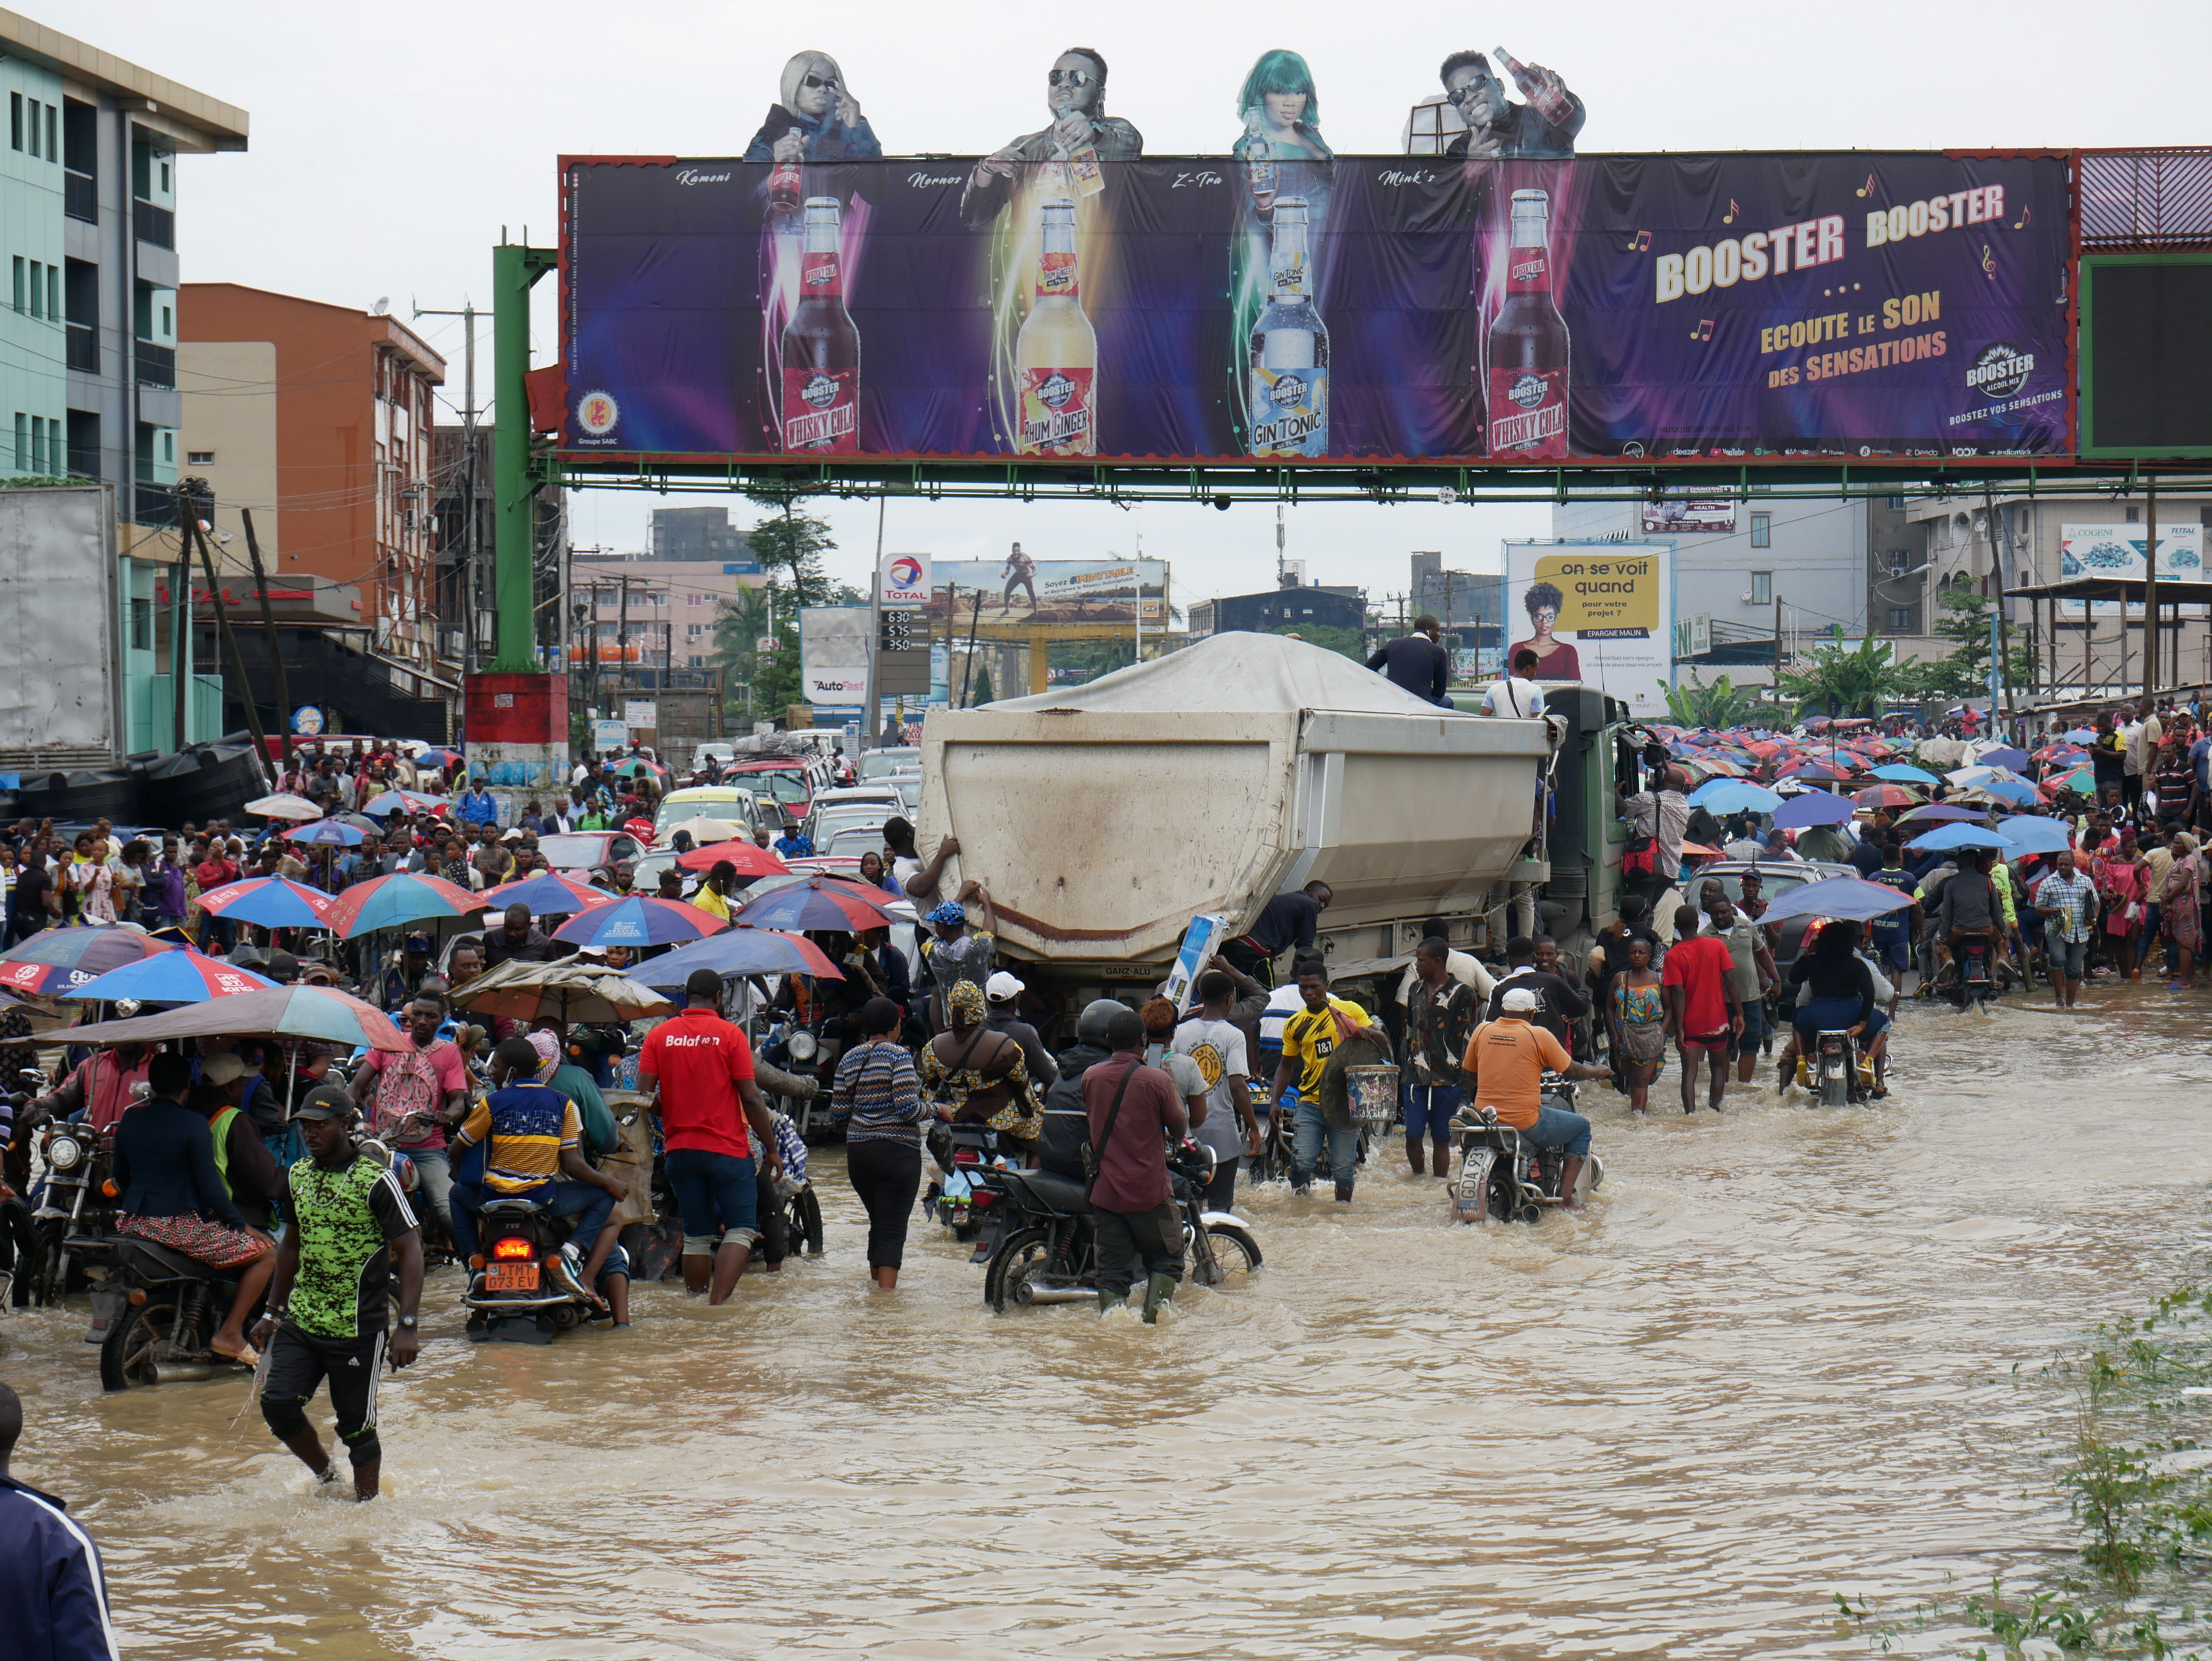 People make their way through a flooded street after the heavy rains in Douala